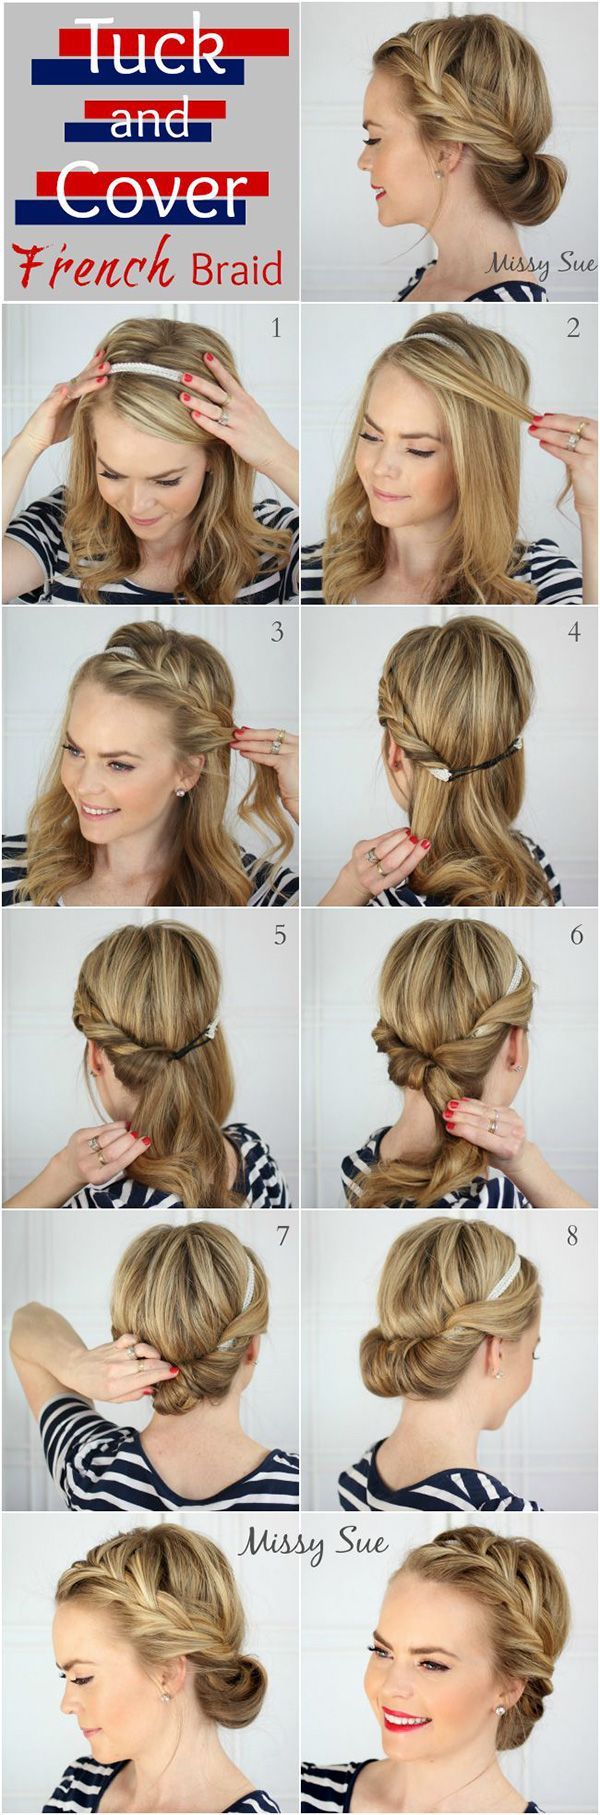 10 Easy Hairstyles For Bangs To Get Them Out Of Your Face | The Tuck and Cover French